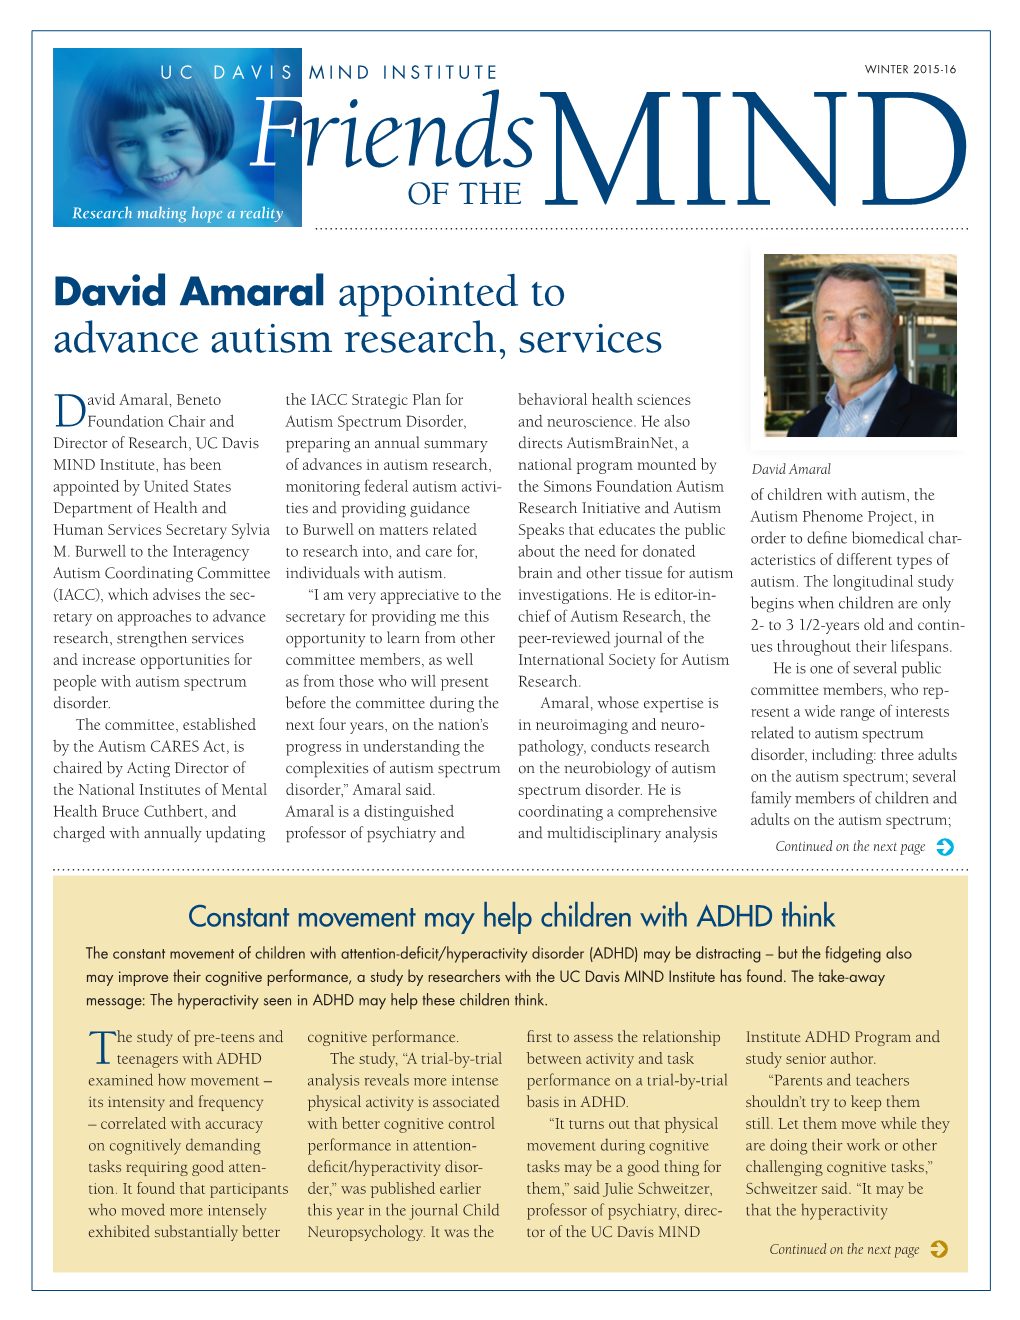 David Amaral Appointed to Advance Autism Research, Services